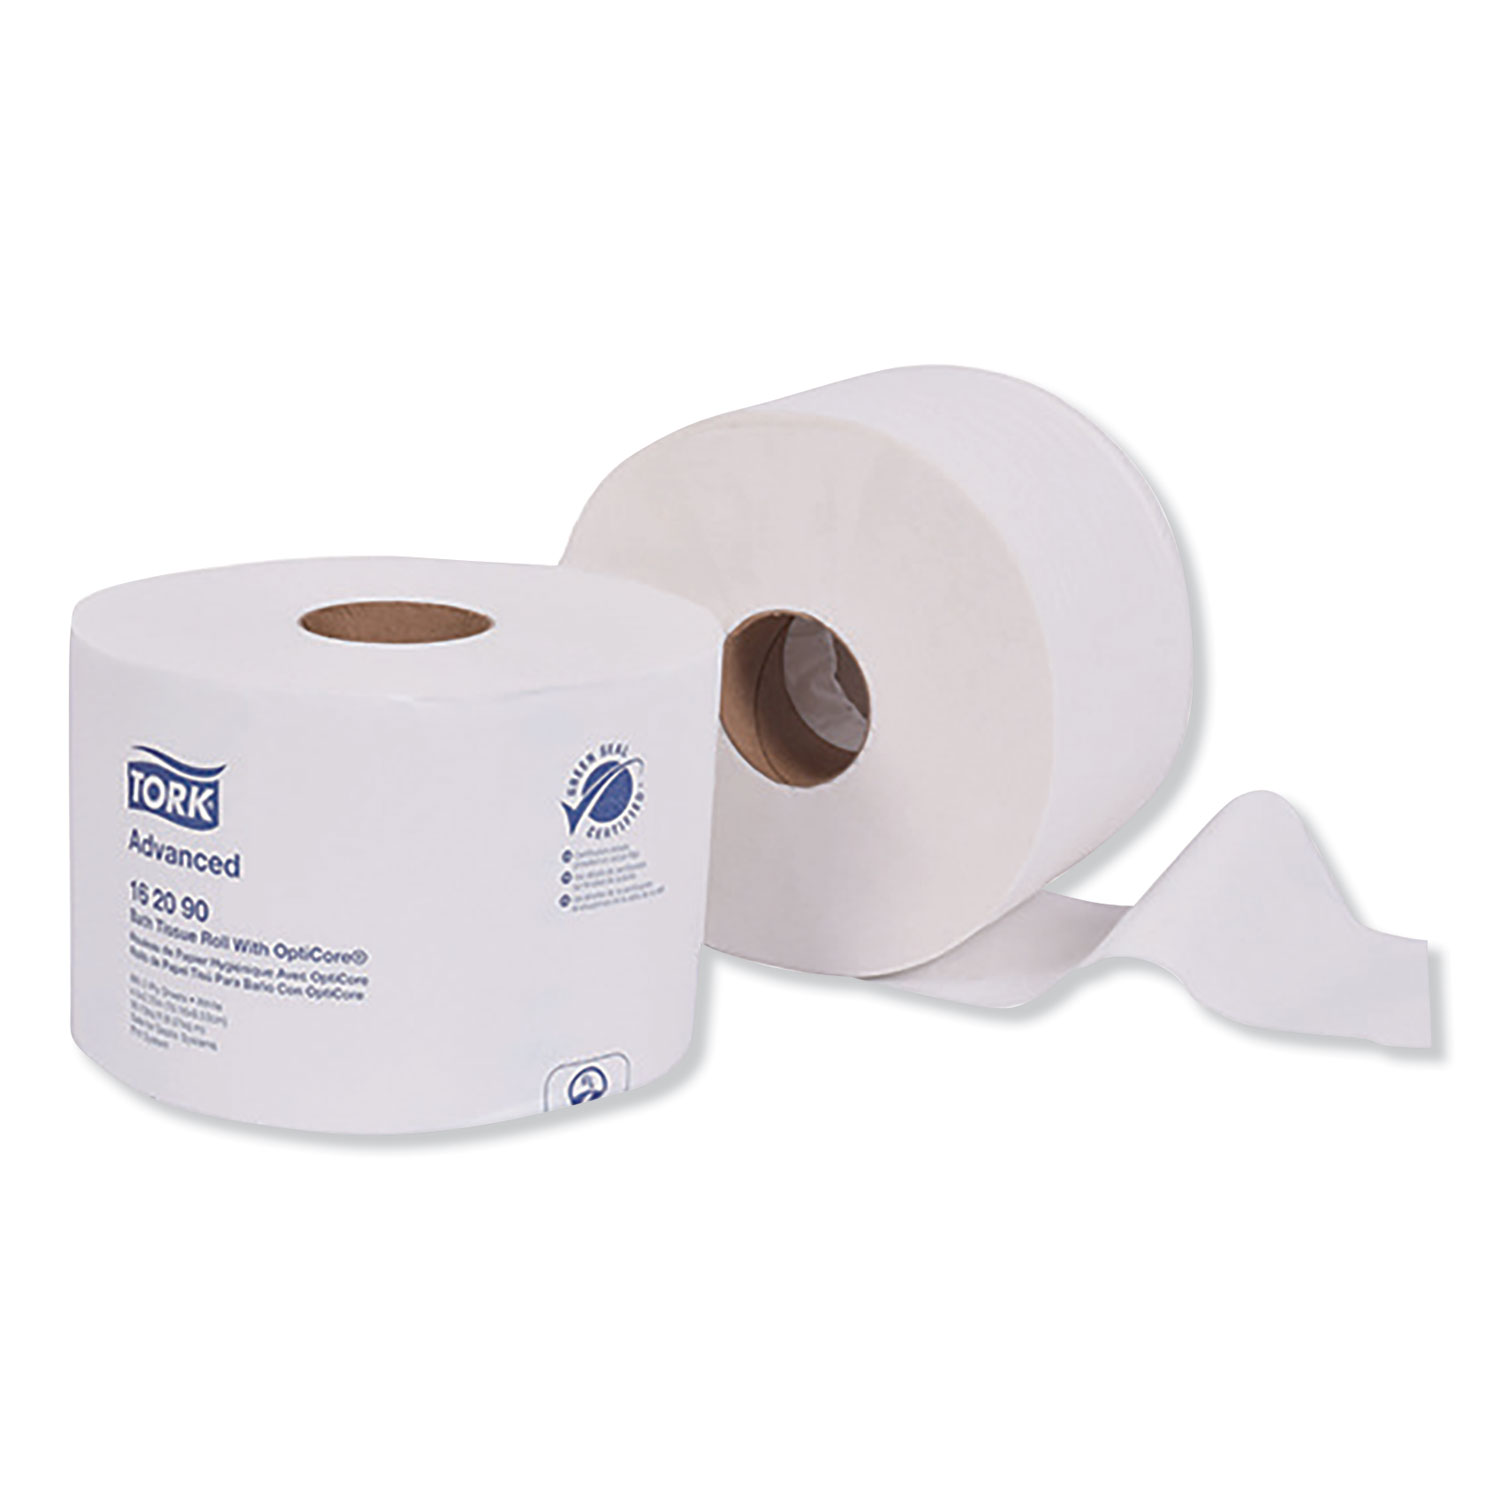  Tork 162090 Advanced Bath Tissue Roll with OptiCore, Septic Safe, 2-Ply, White, 865 Sheets/Roll, 36/Carton (TRK162090) 